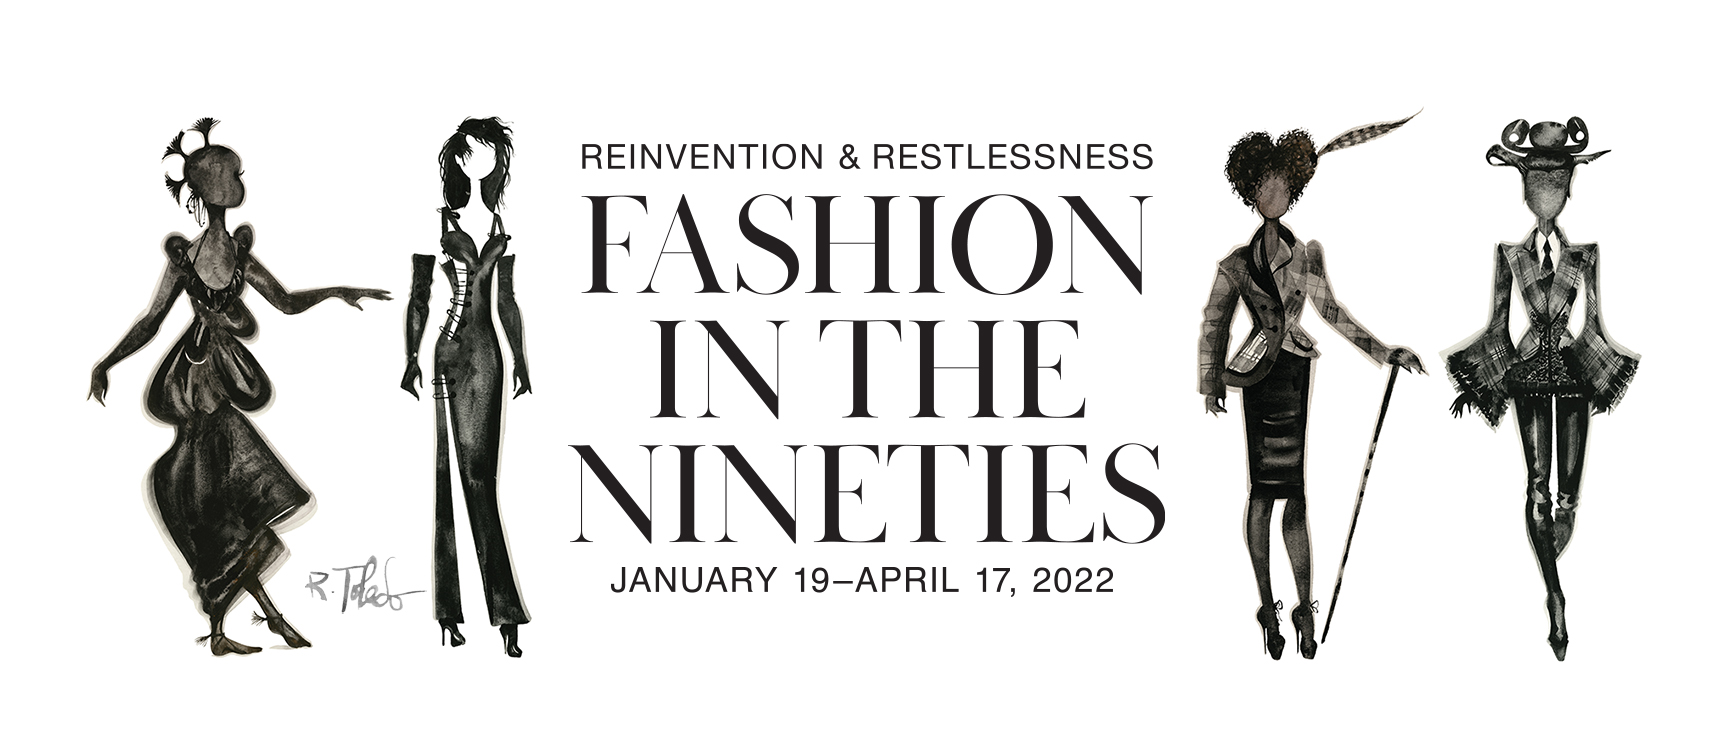 fashion in the nineties January 19-April 17, 2022